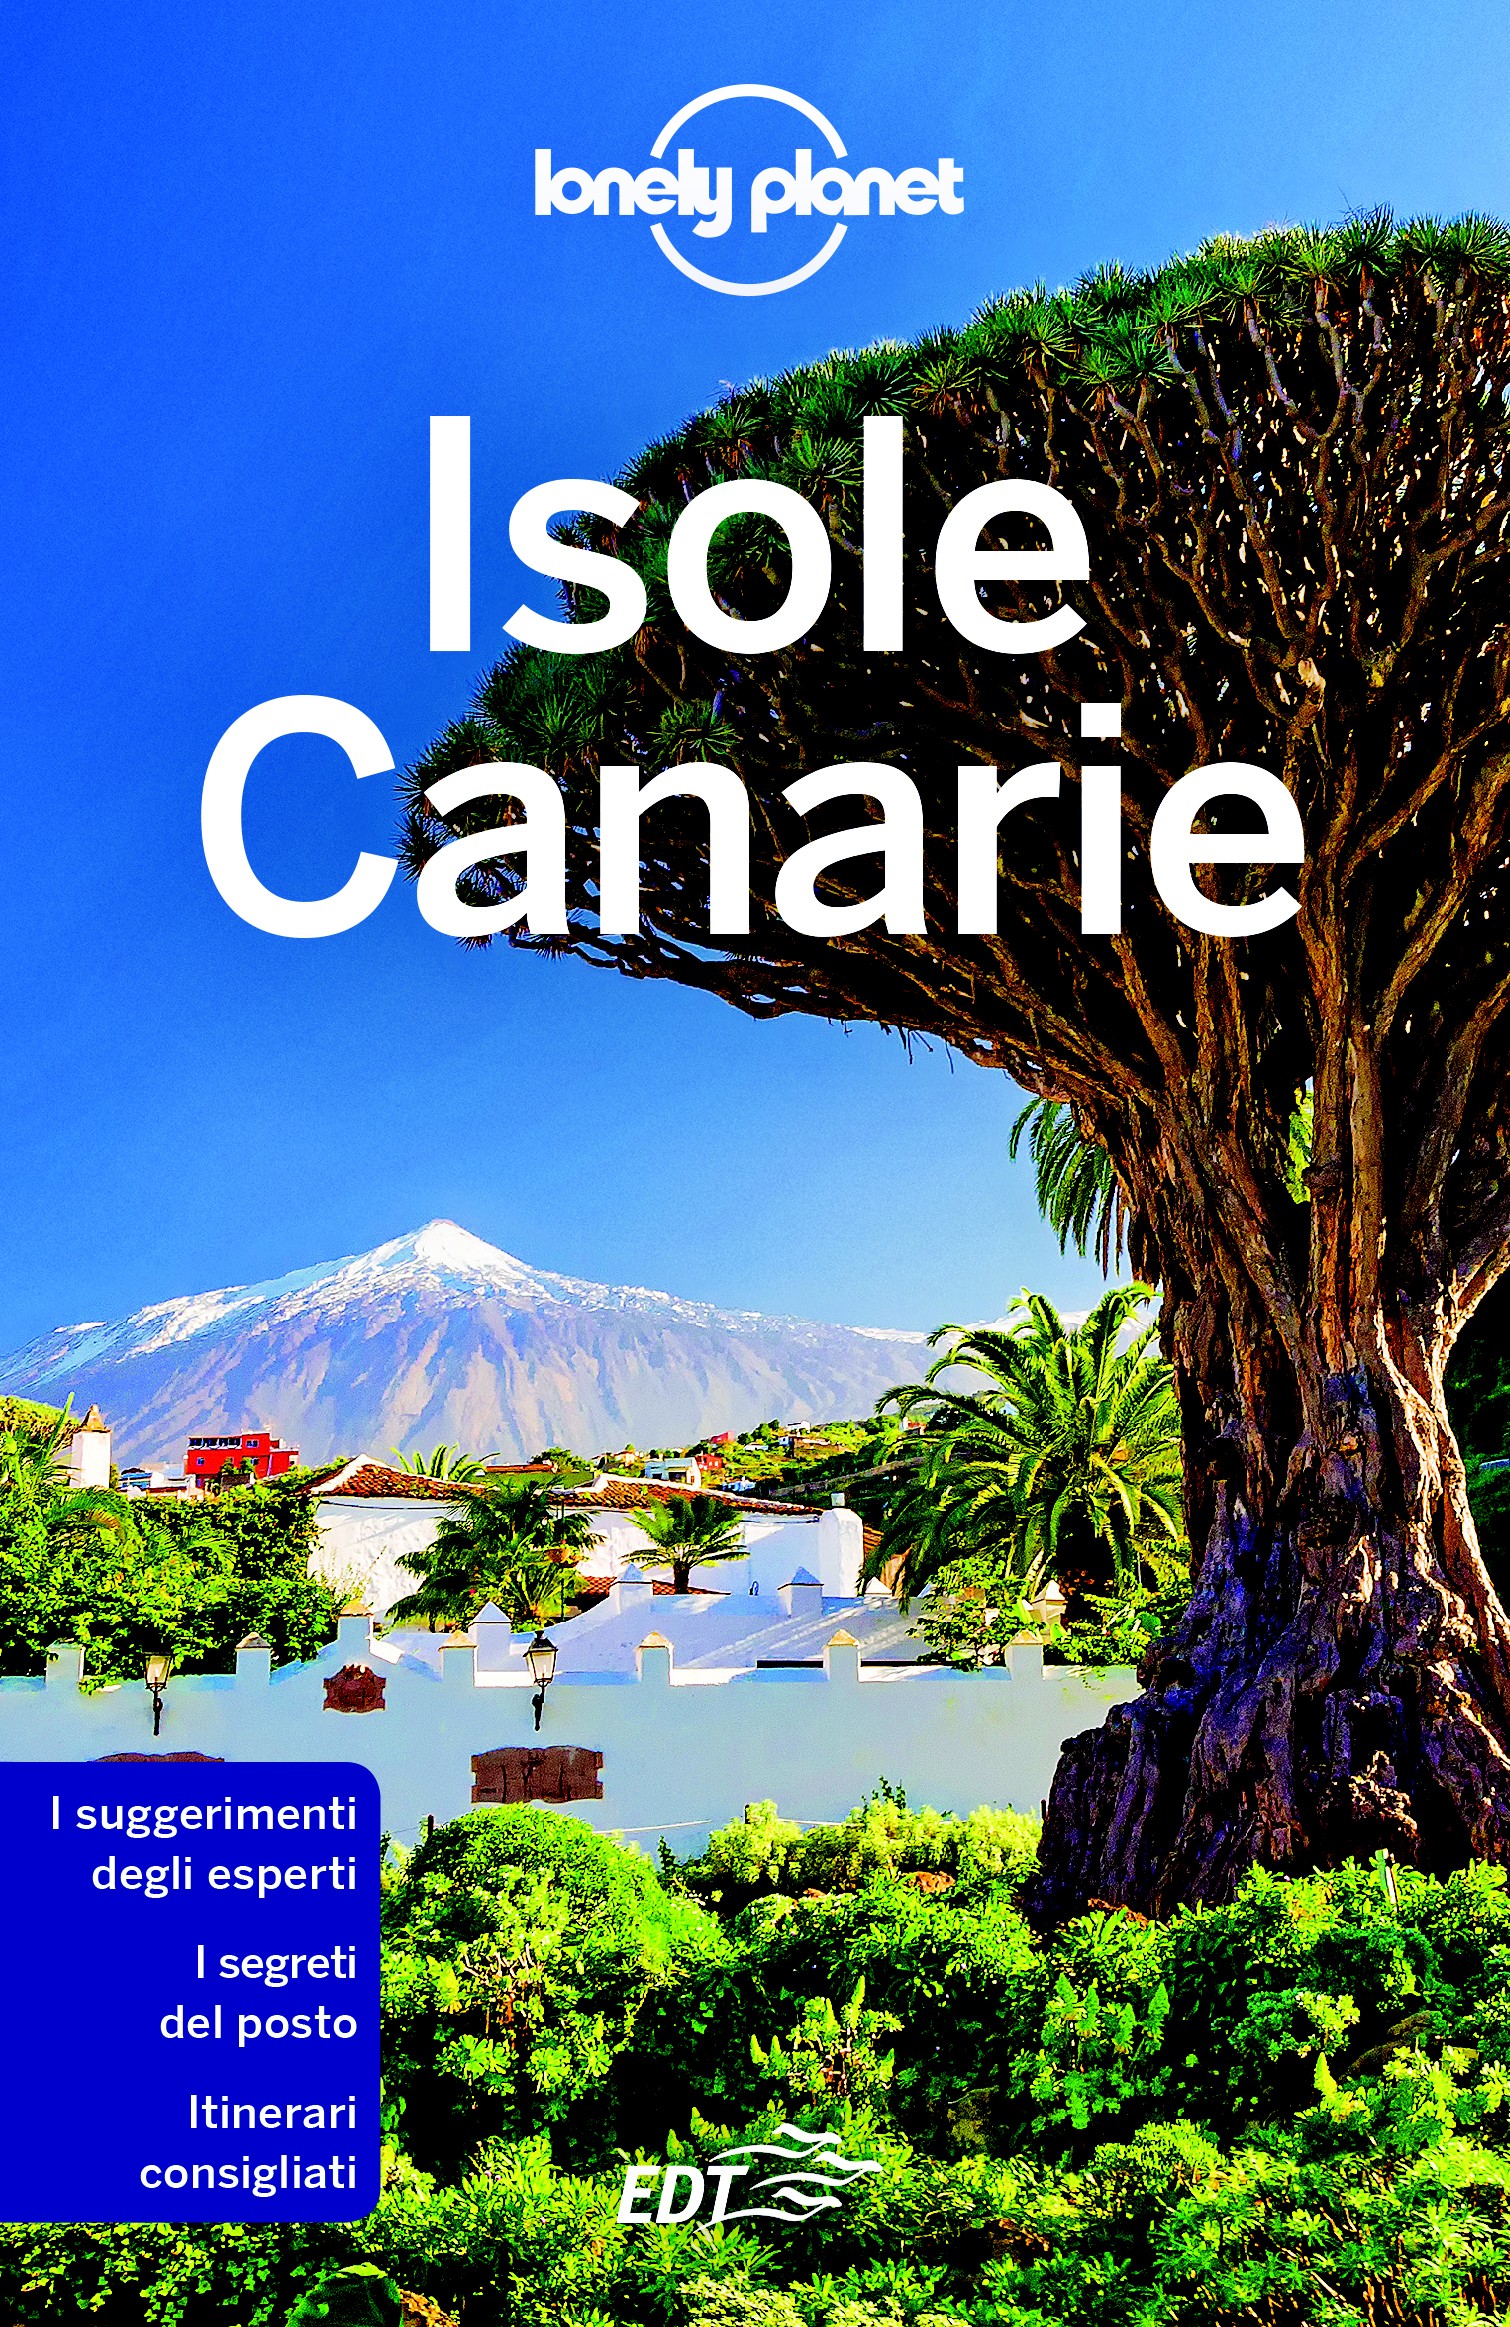 Isole Canarie - Librerie.coop